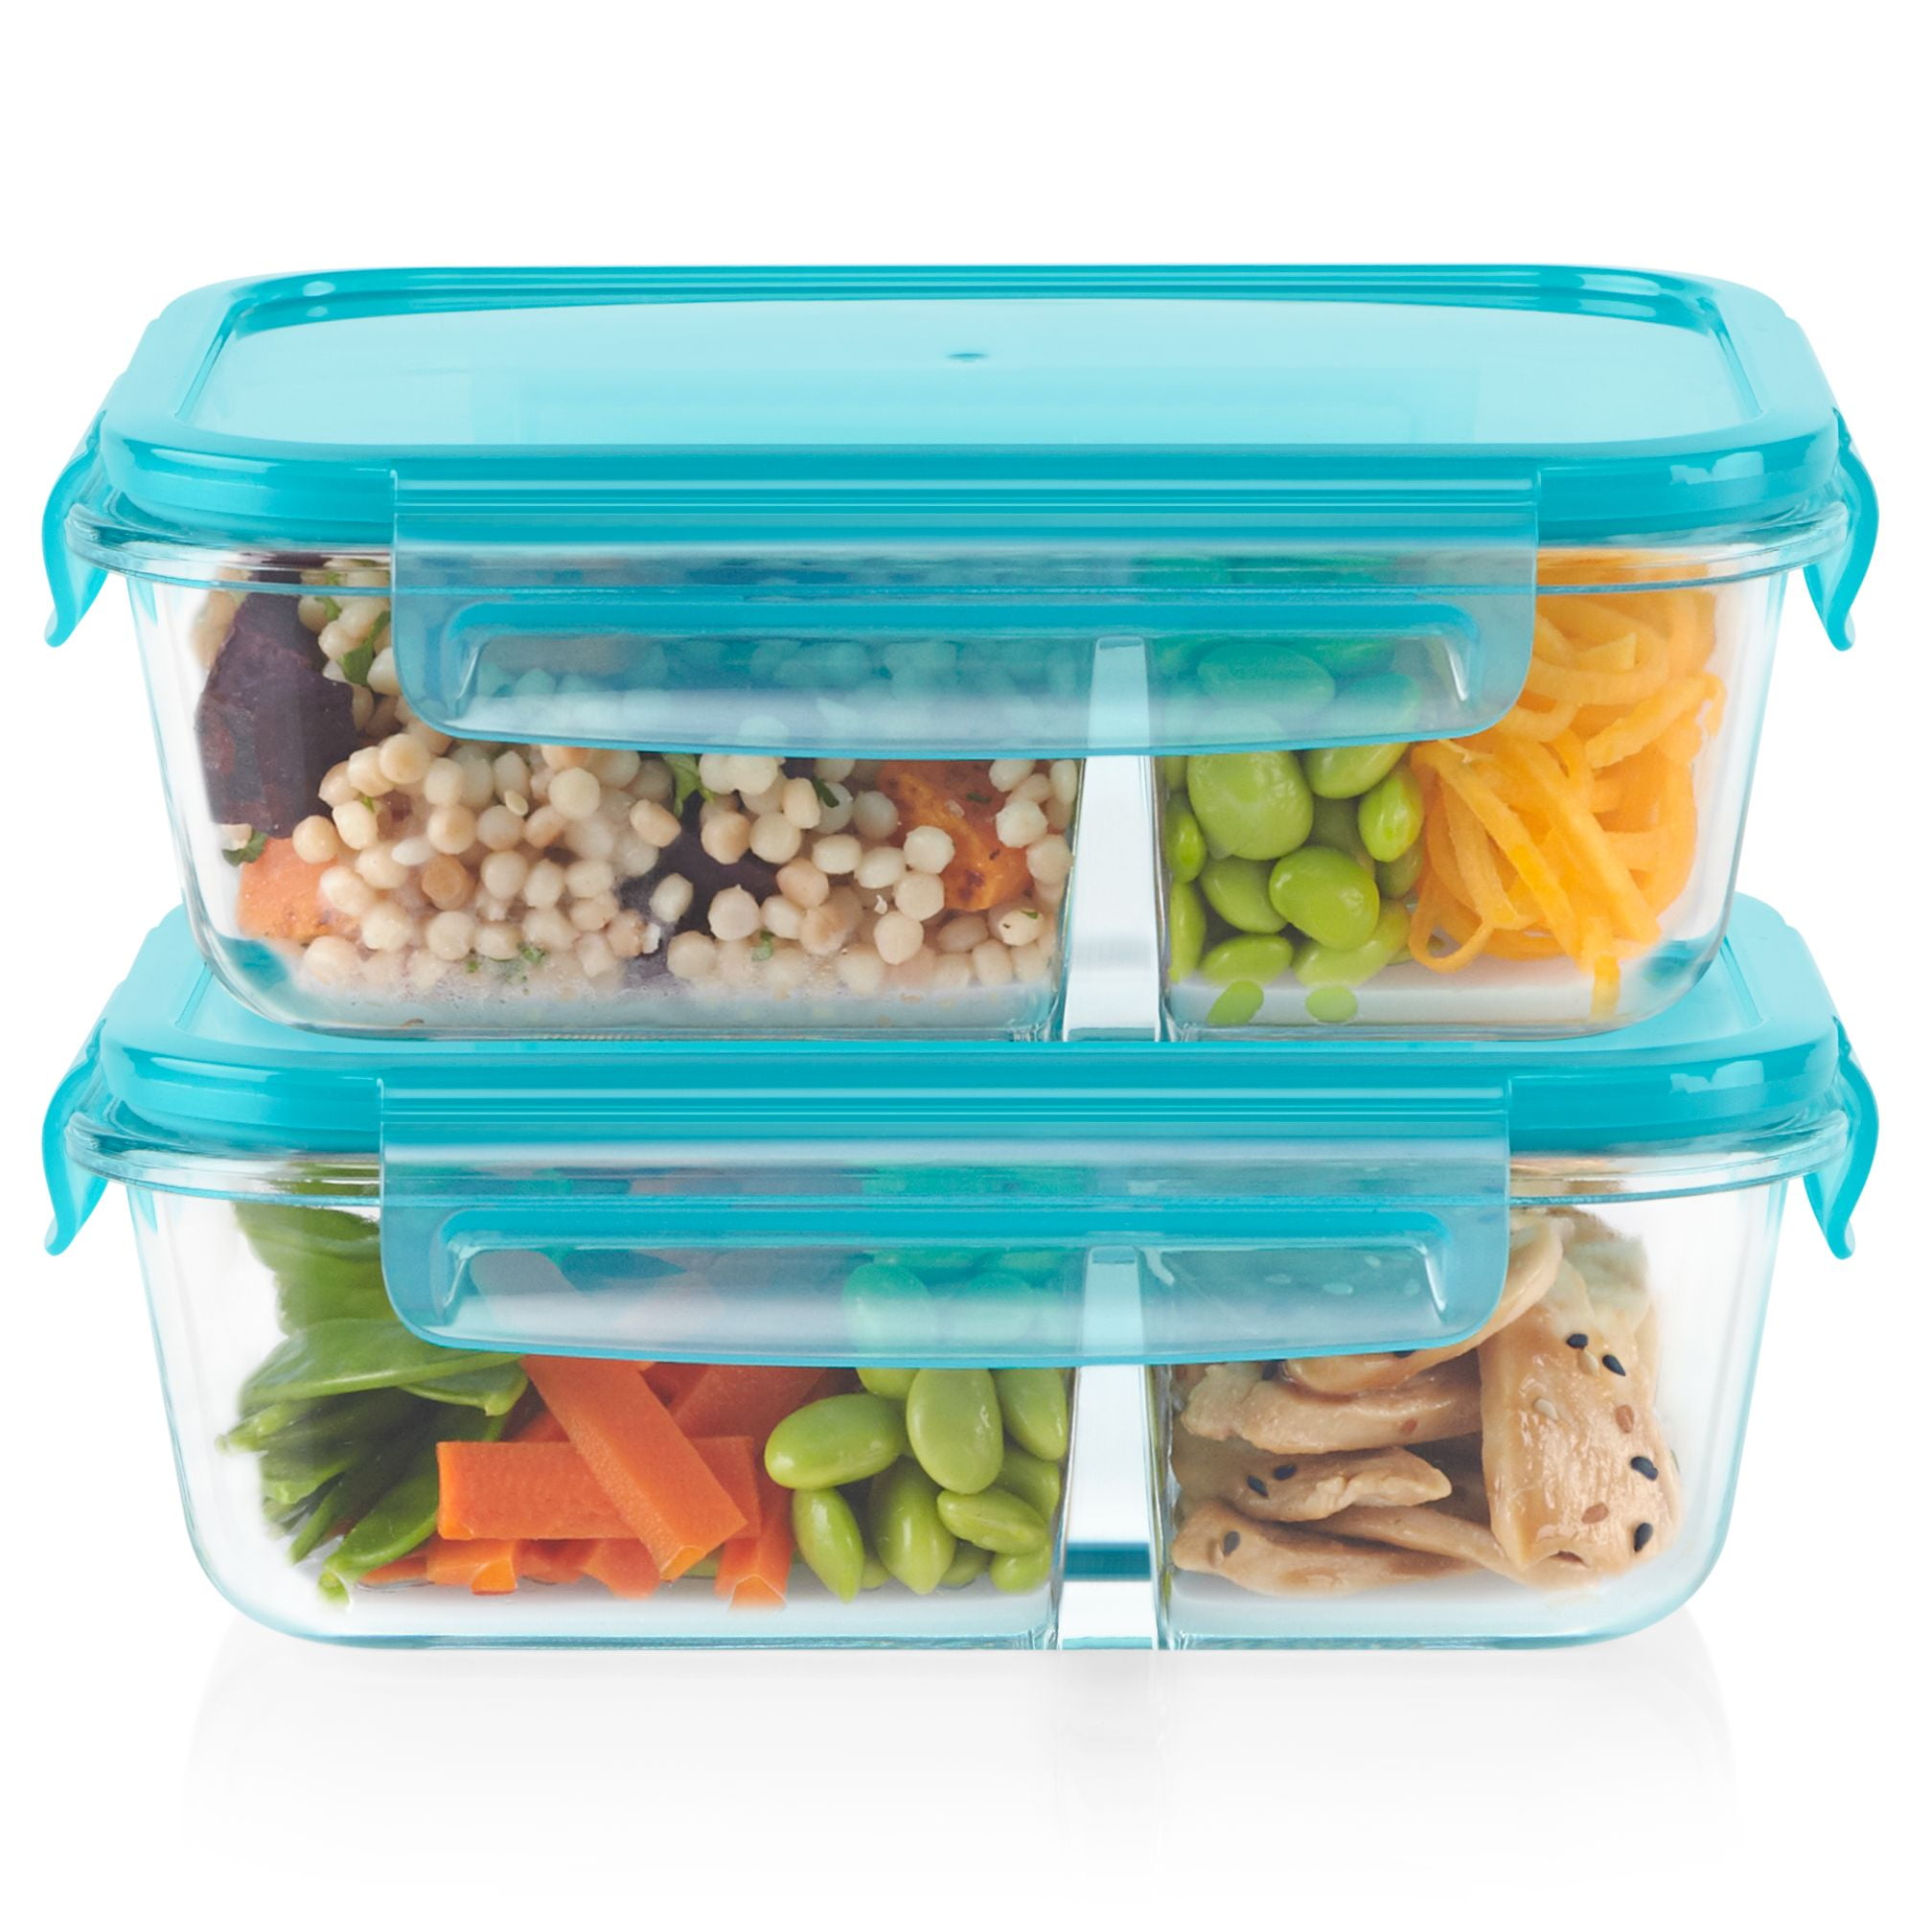 Pyrex Mealbox 10-Pc Bento Box Set, 4-Cup Divided Glass Food Storage  Containers Set, Non-Toxic, BPA-Free Latching Lids, Freezer, Microwave and  Top-Rack